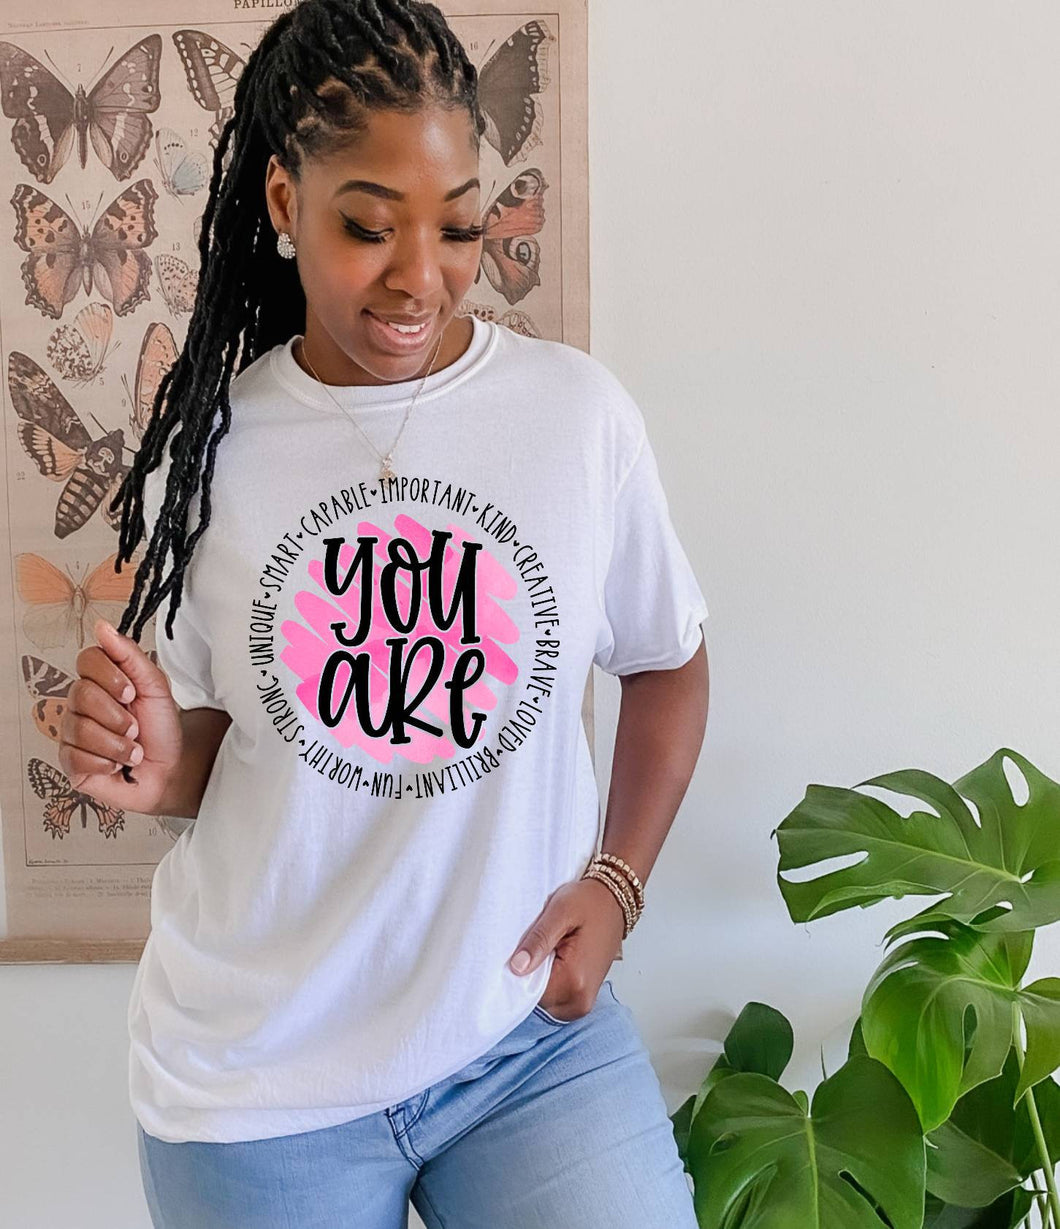 You are Kind, Important, Unique, Smart tshirt,  Inspirational, positive vibes shirt.